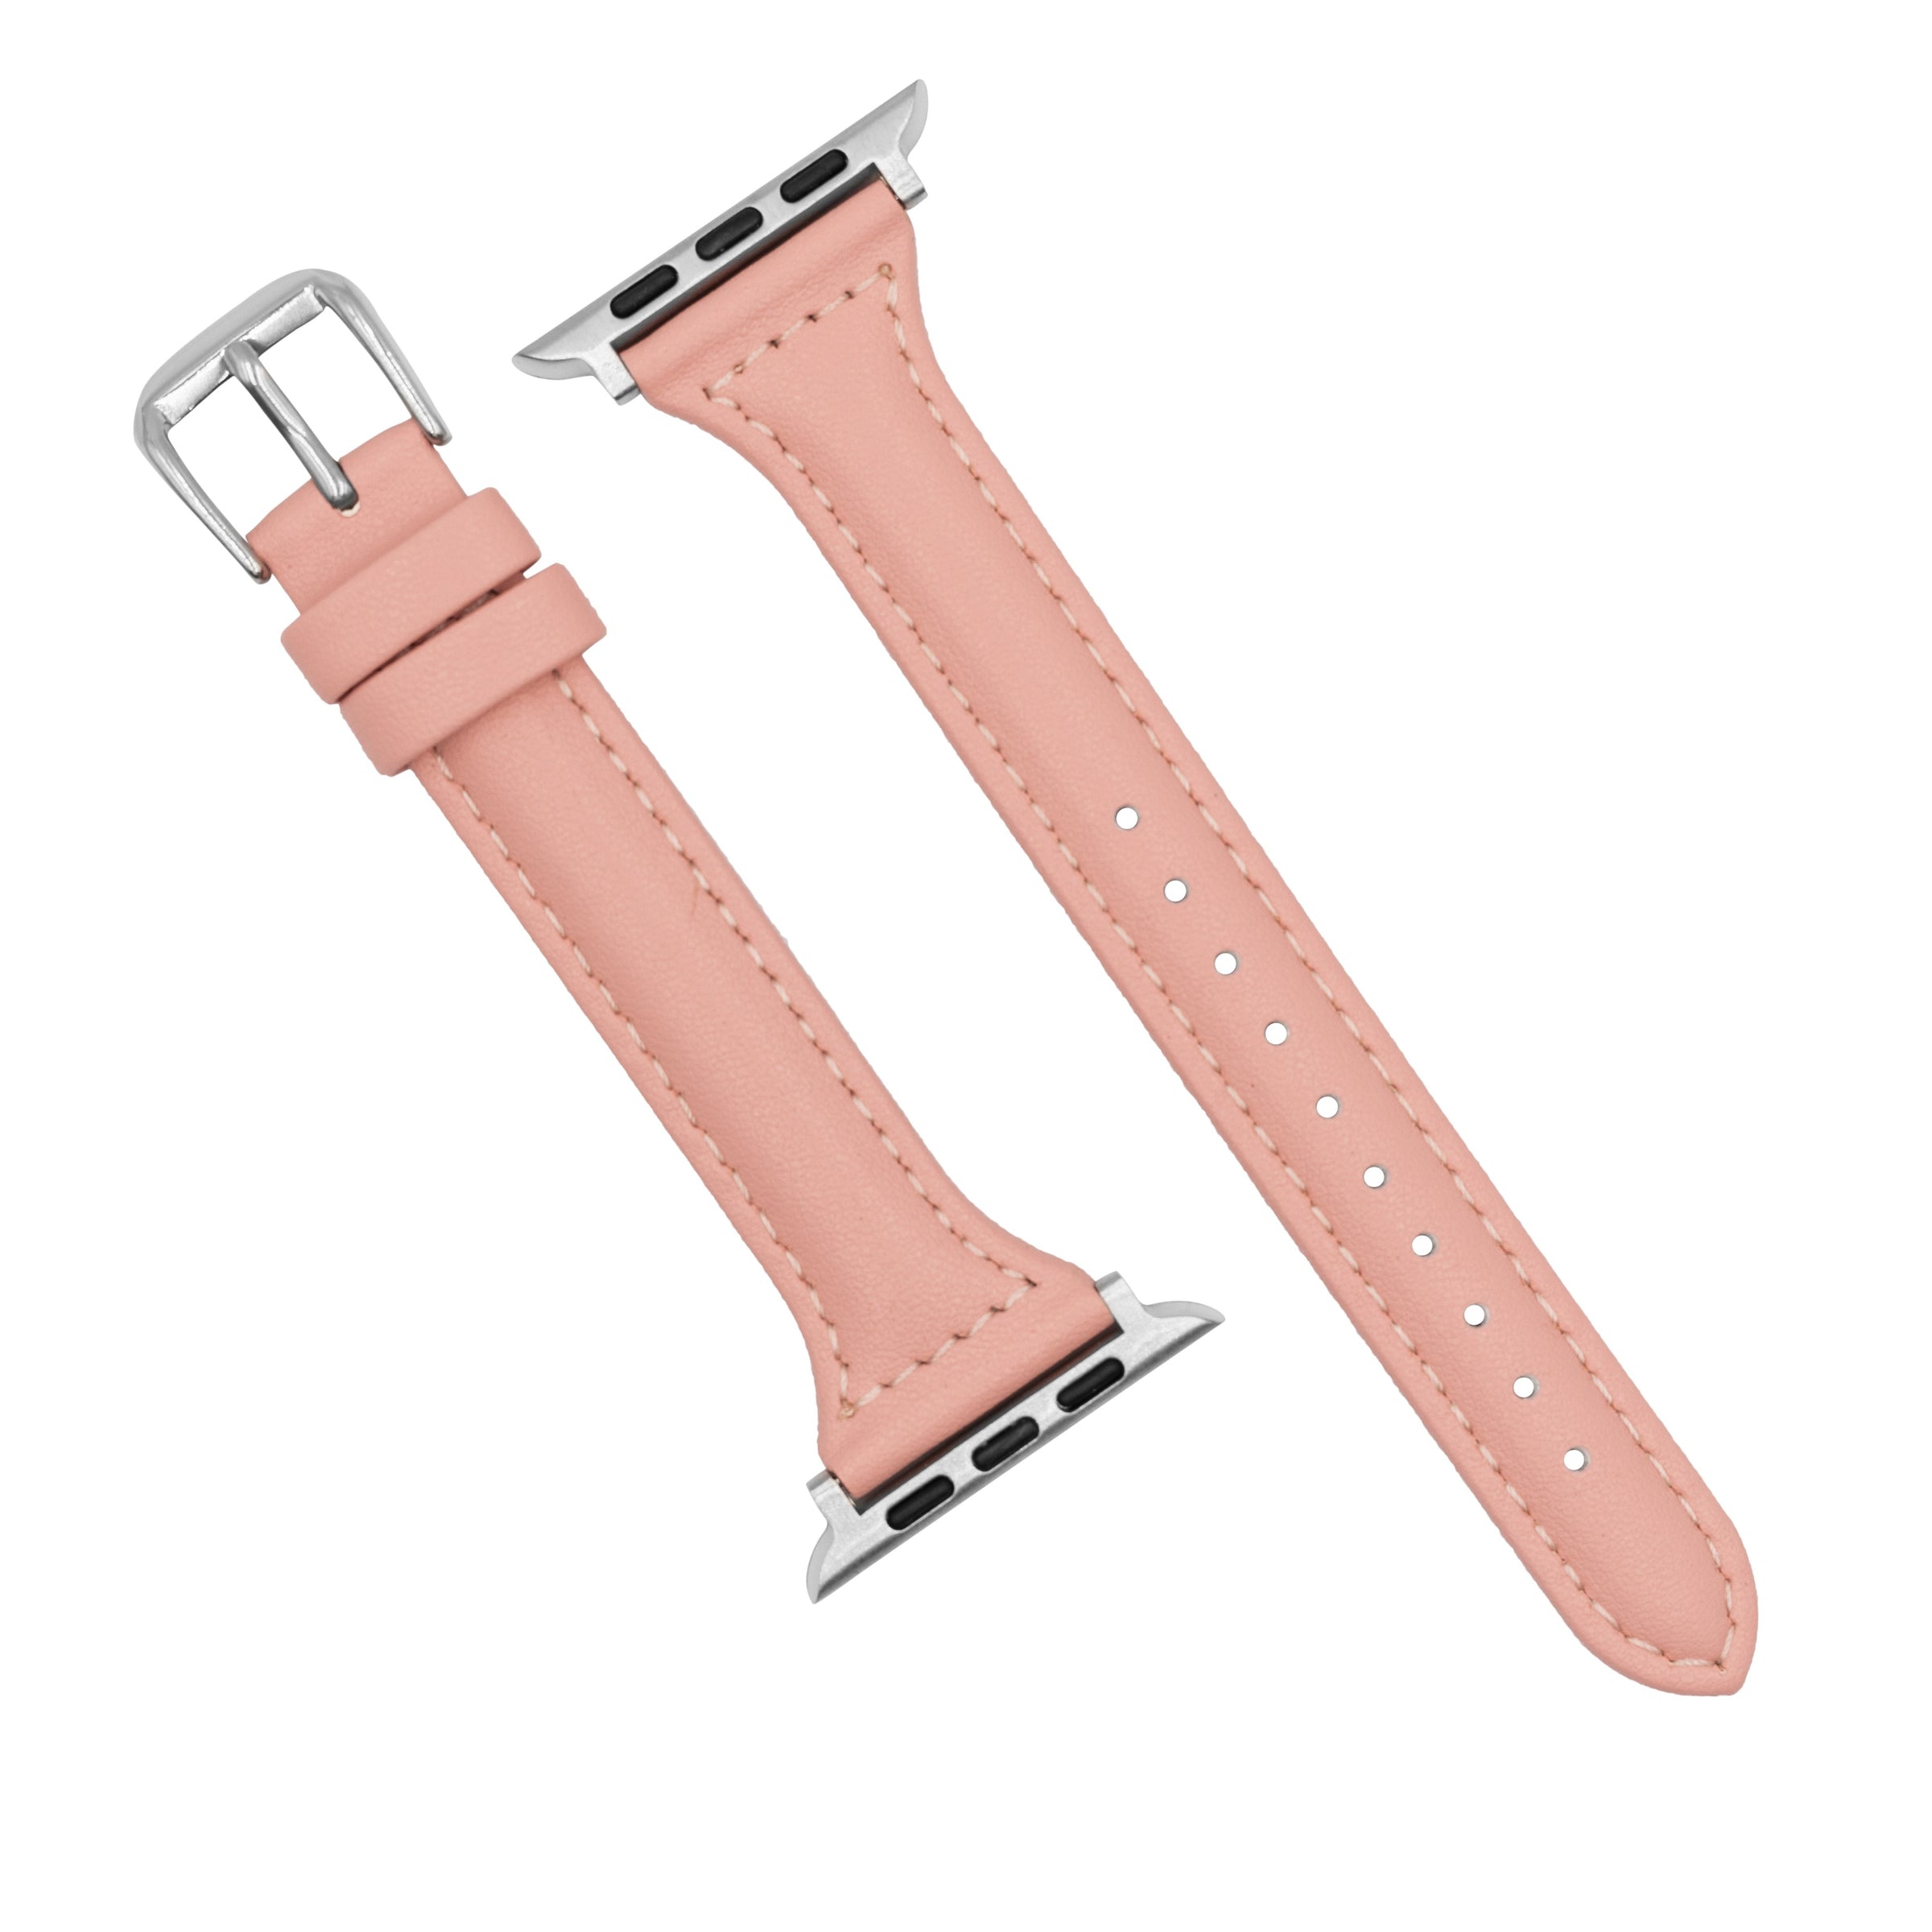 Slim Leather Strap in Pink (Apple Watch)